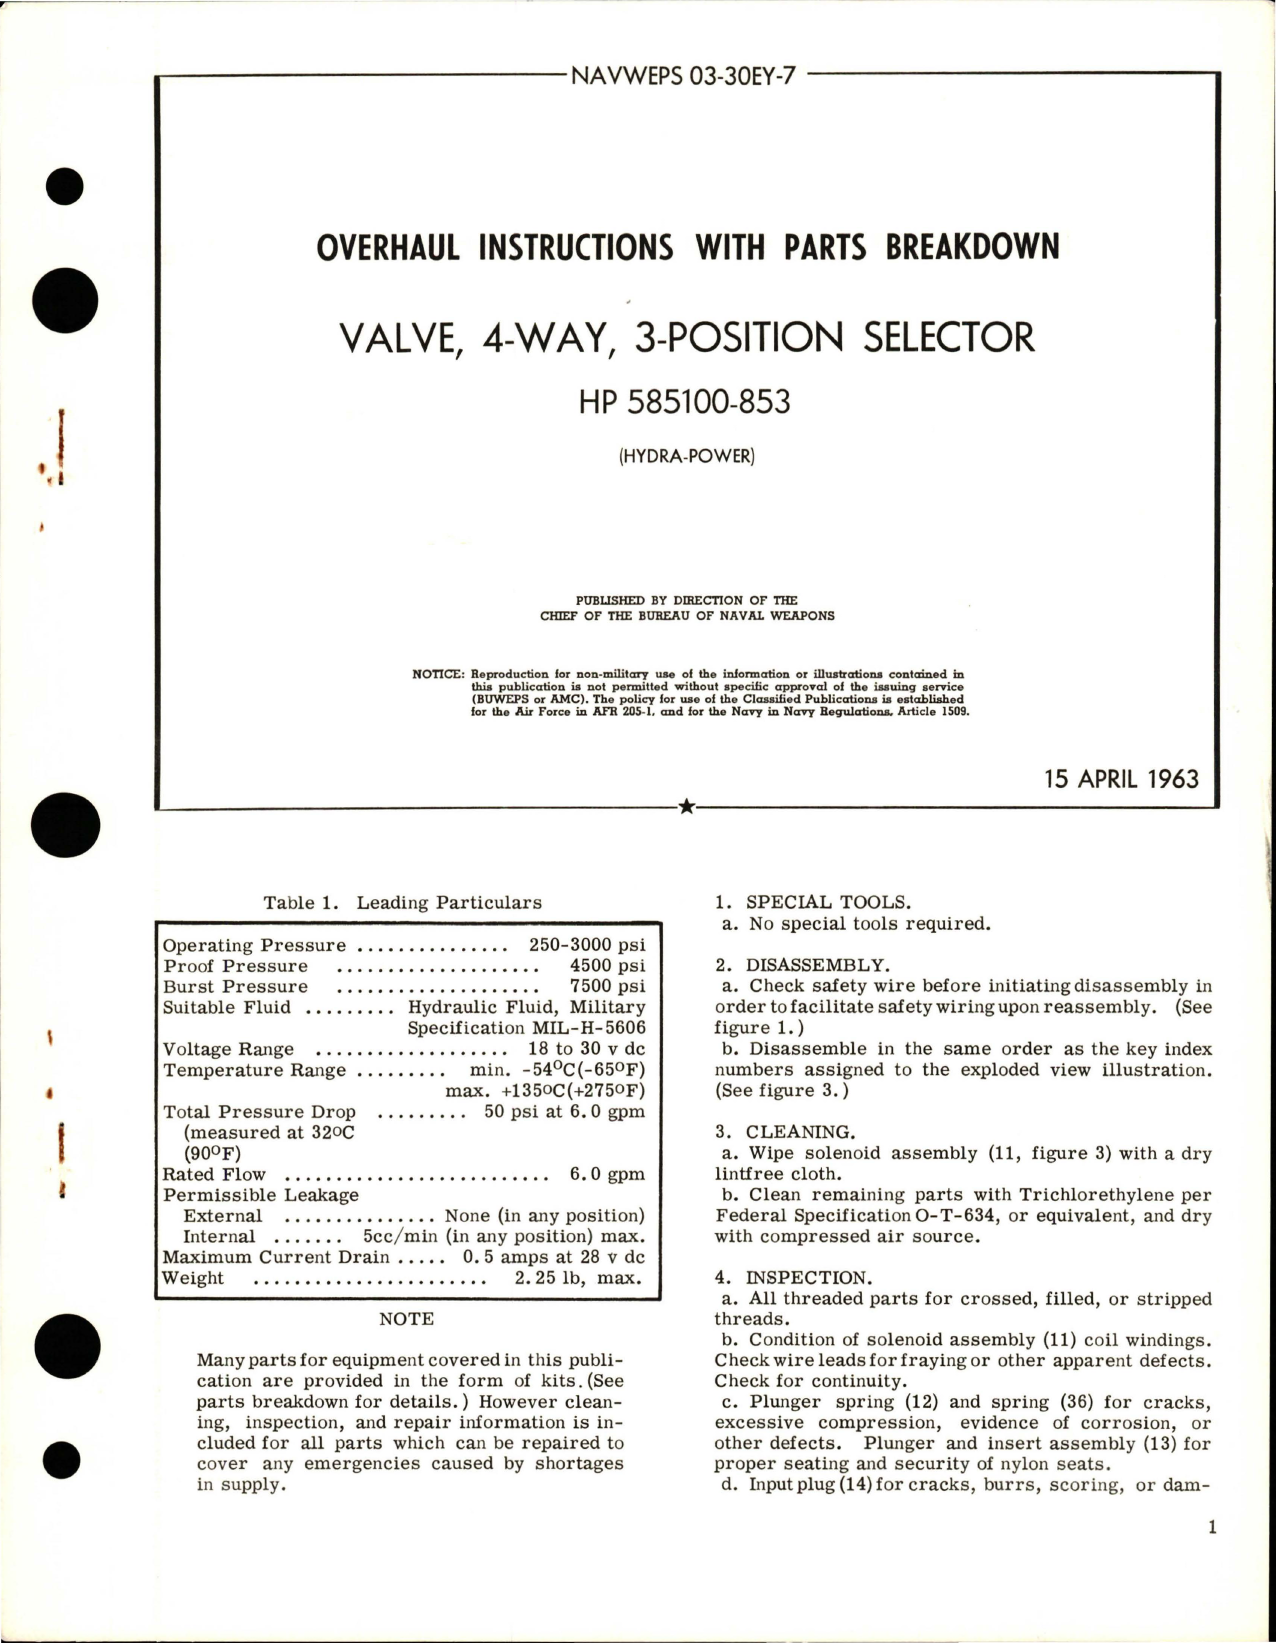 Sample page 1 from AirCorps Library document: 4-Way 3-Position Selector Valve - HP 585100-853